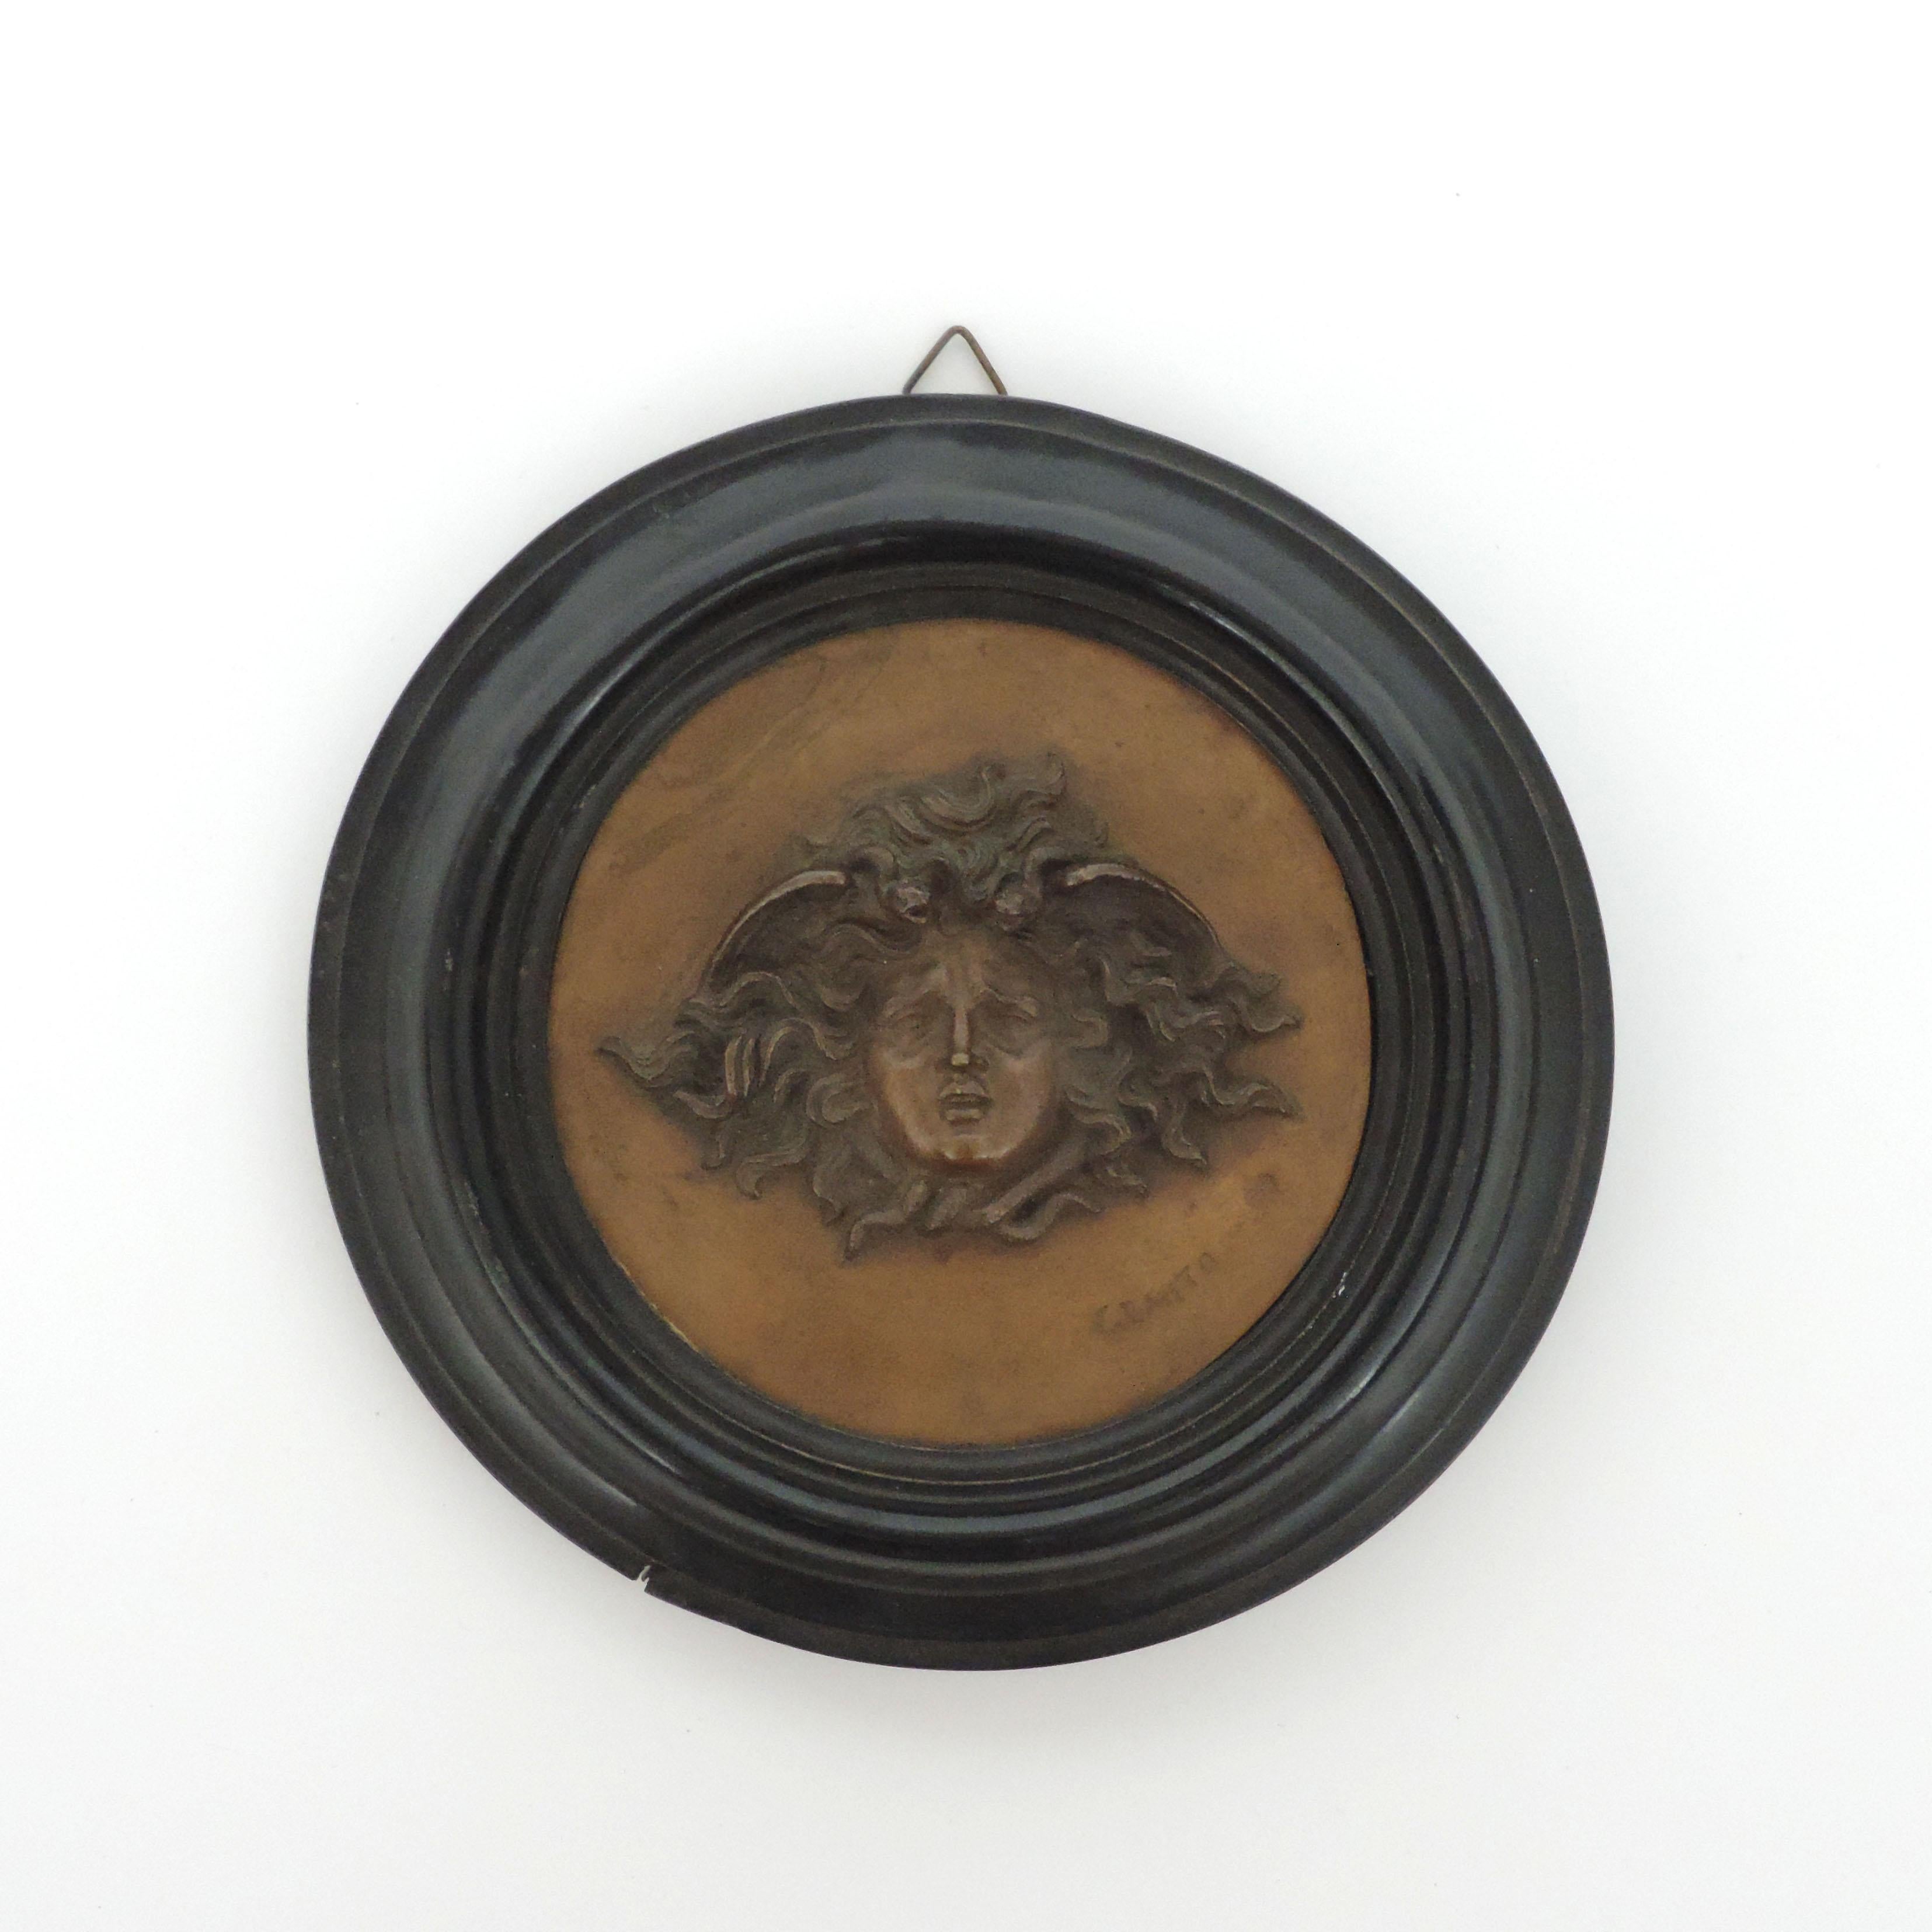 Vincenzo Gemito bronze roundel with the medusa head, Italy 1910.
Signed Gemito and Fonderia Gemito Napoli.
In a wooden frame.